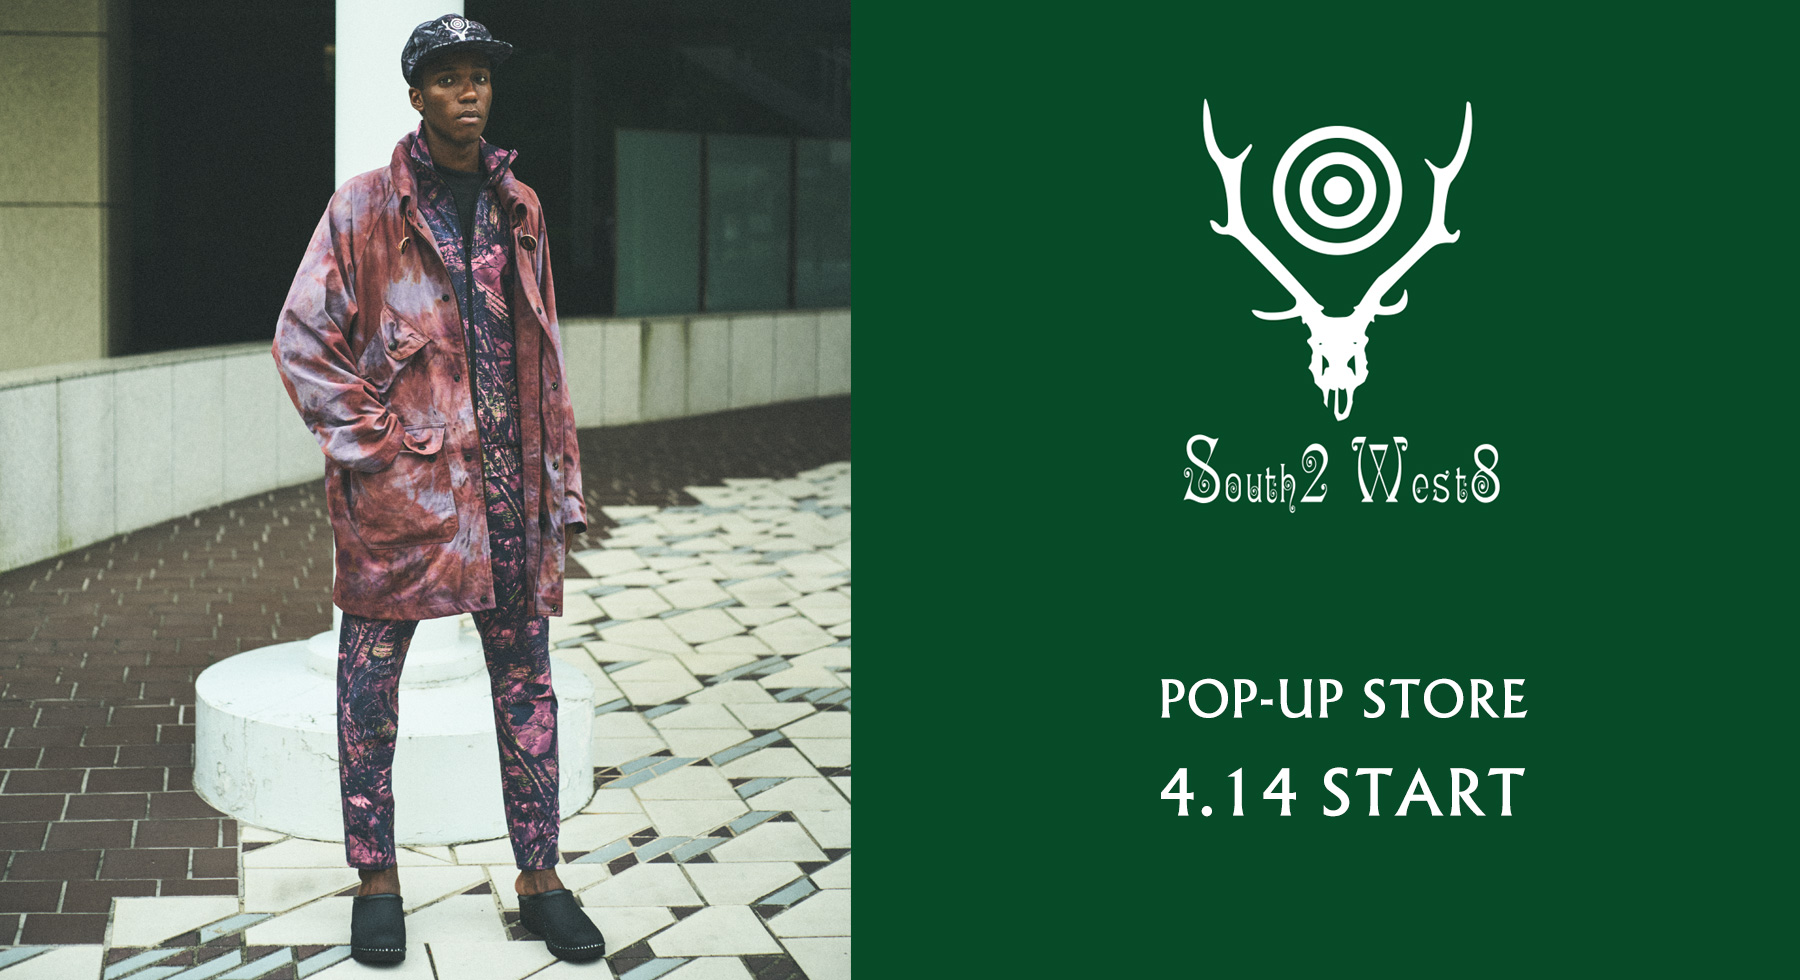 south2 west8 POP-UP STORE